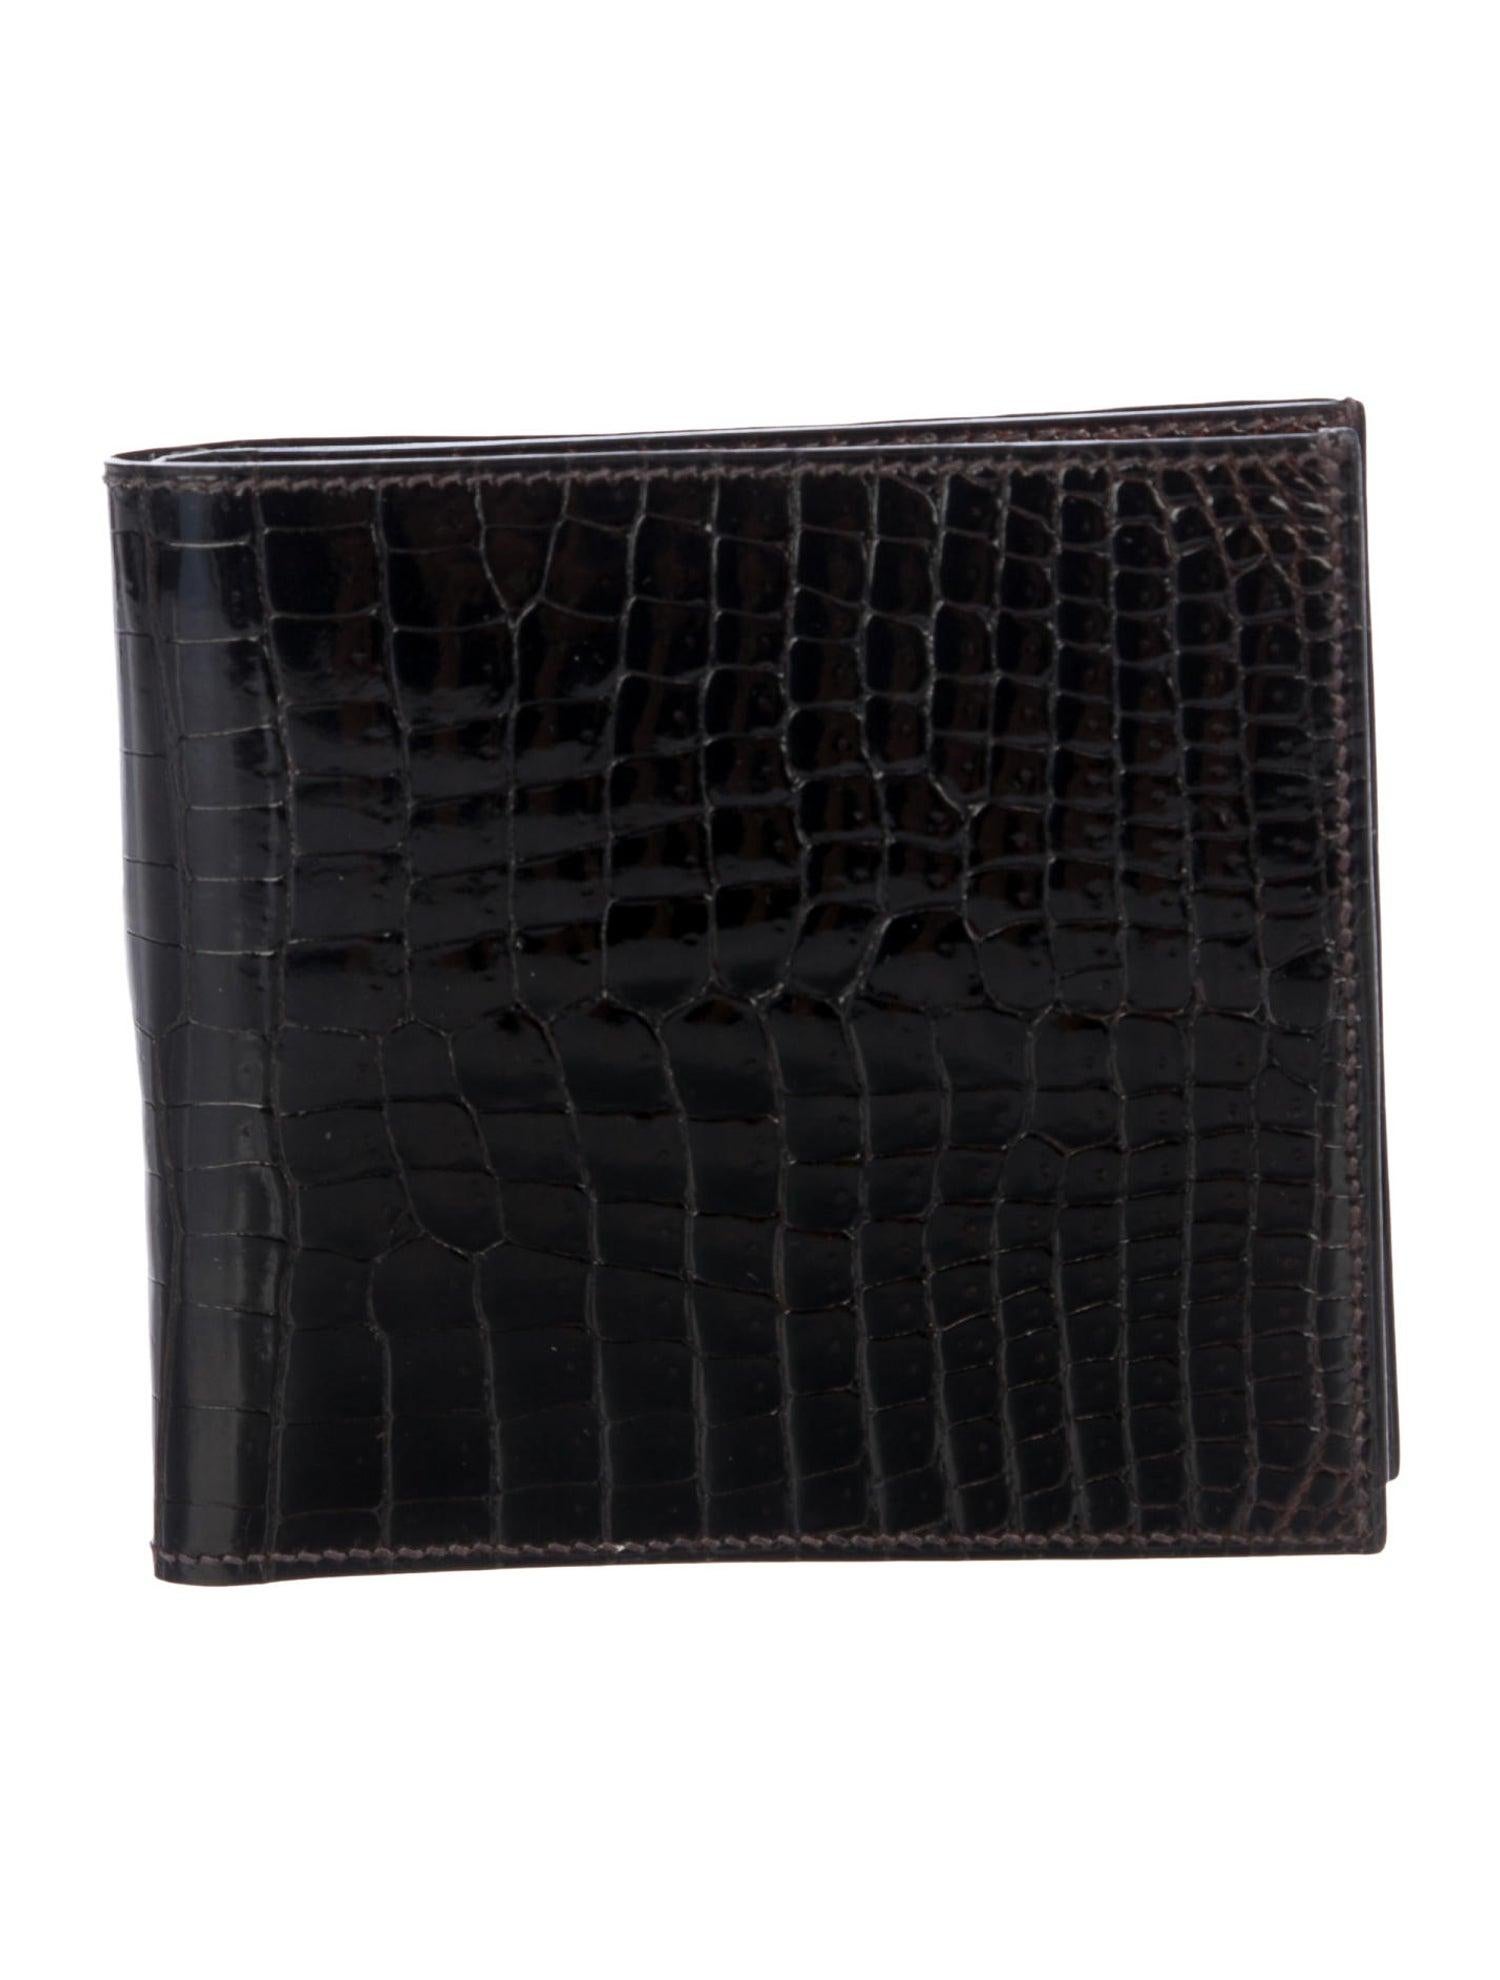 Hermes NEW Crocodile Exotic Leather Men's Suit Bifold Bifold Pocket Wallet 

Crocodile
Leather lining
Fold over closure
Features six interior card slots, dual wall pockets and bill compartment 
Made in France
Measures 4.5